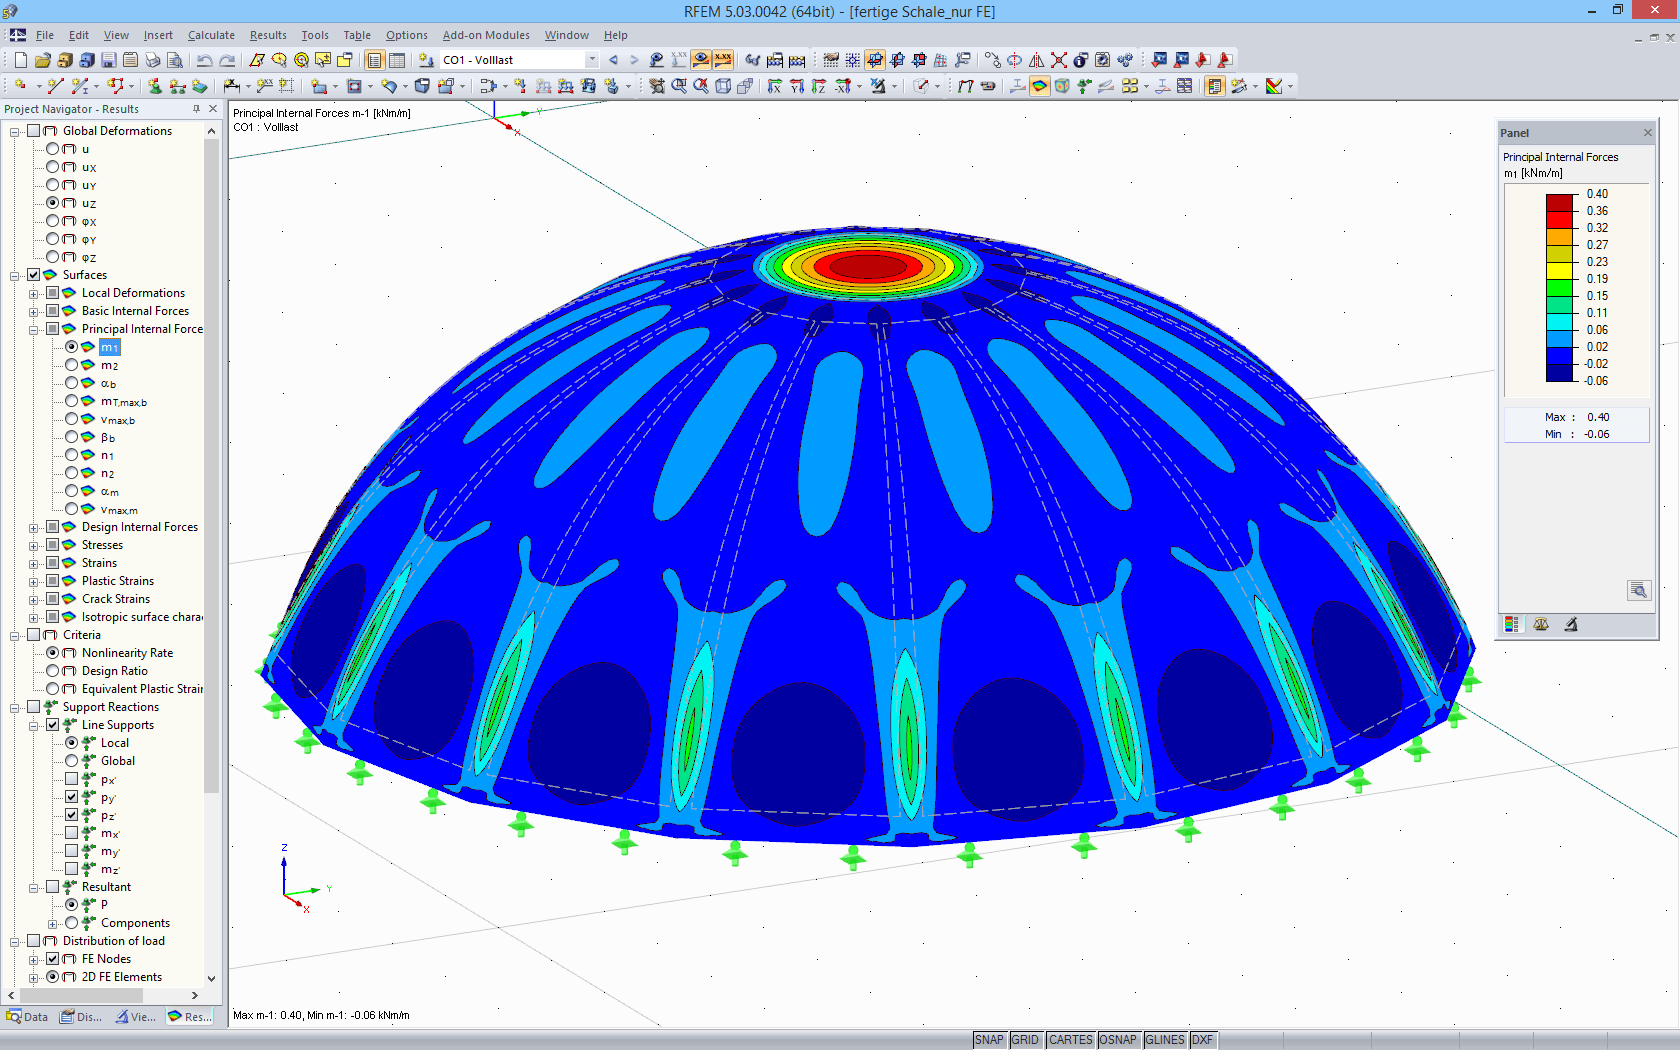 RFEM Graphic with Representation of Maximum Moments of 0.40 kNm/m in Shell (Final State) Stressed by Self-Weight and Snow of 1.50 kN/m² (© TU Wien)